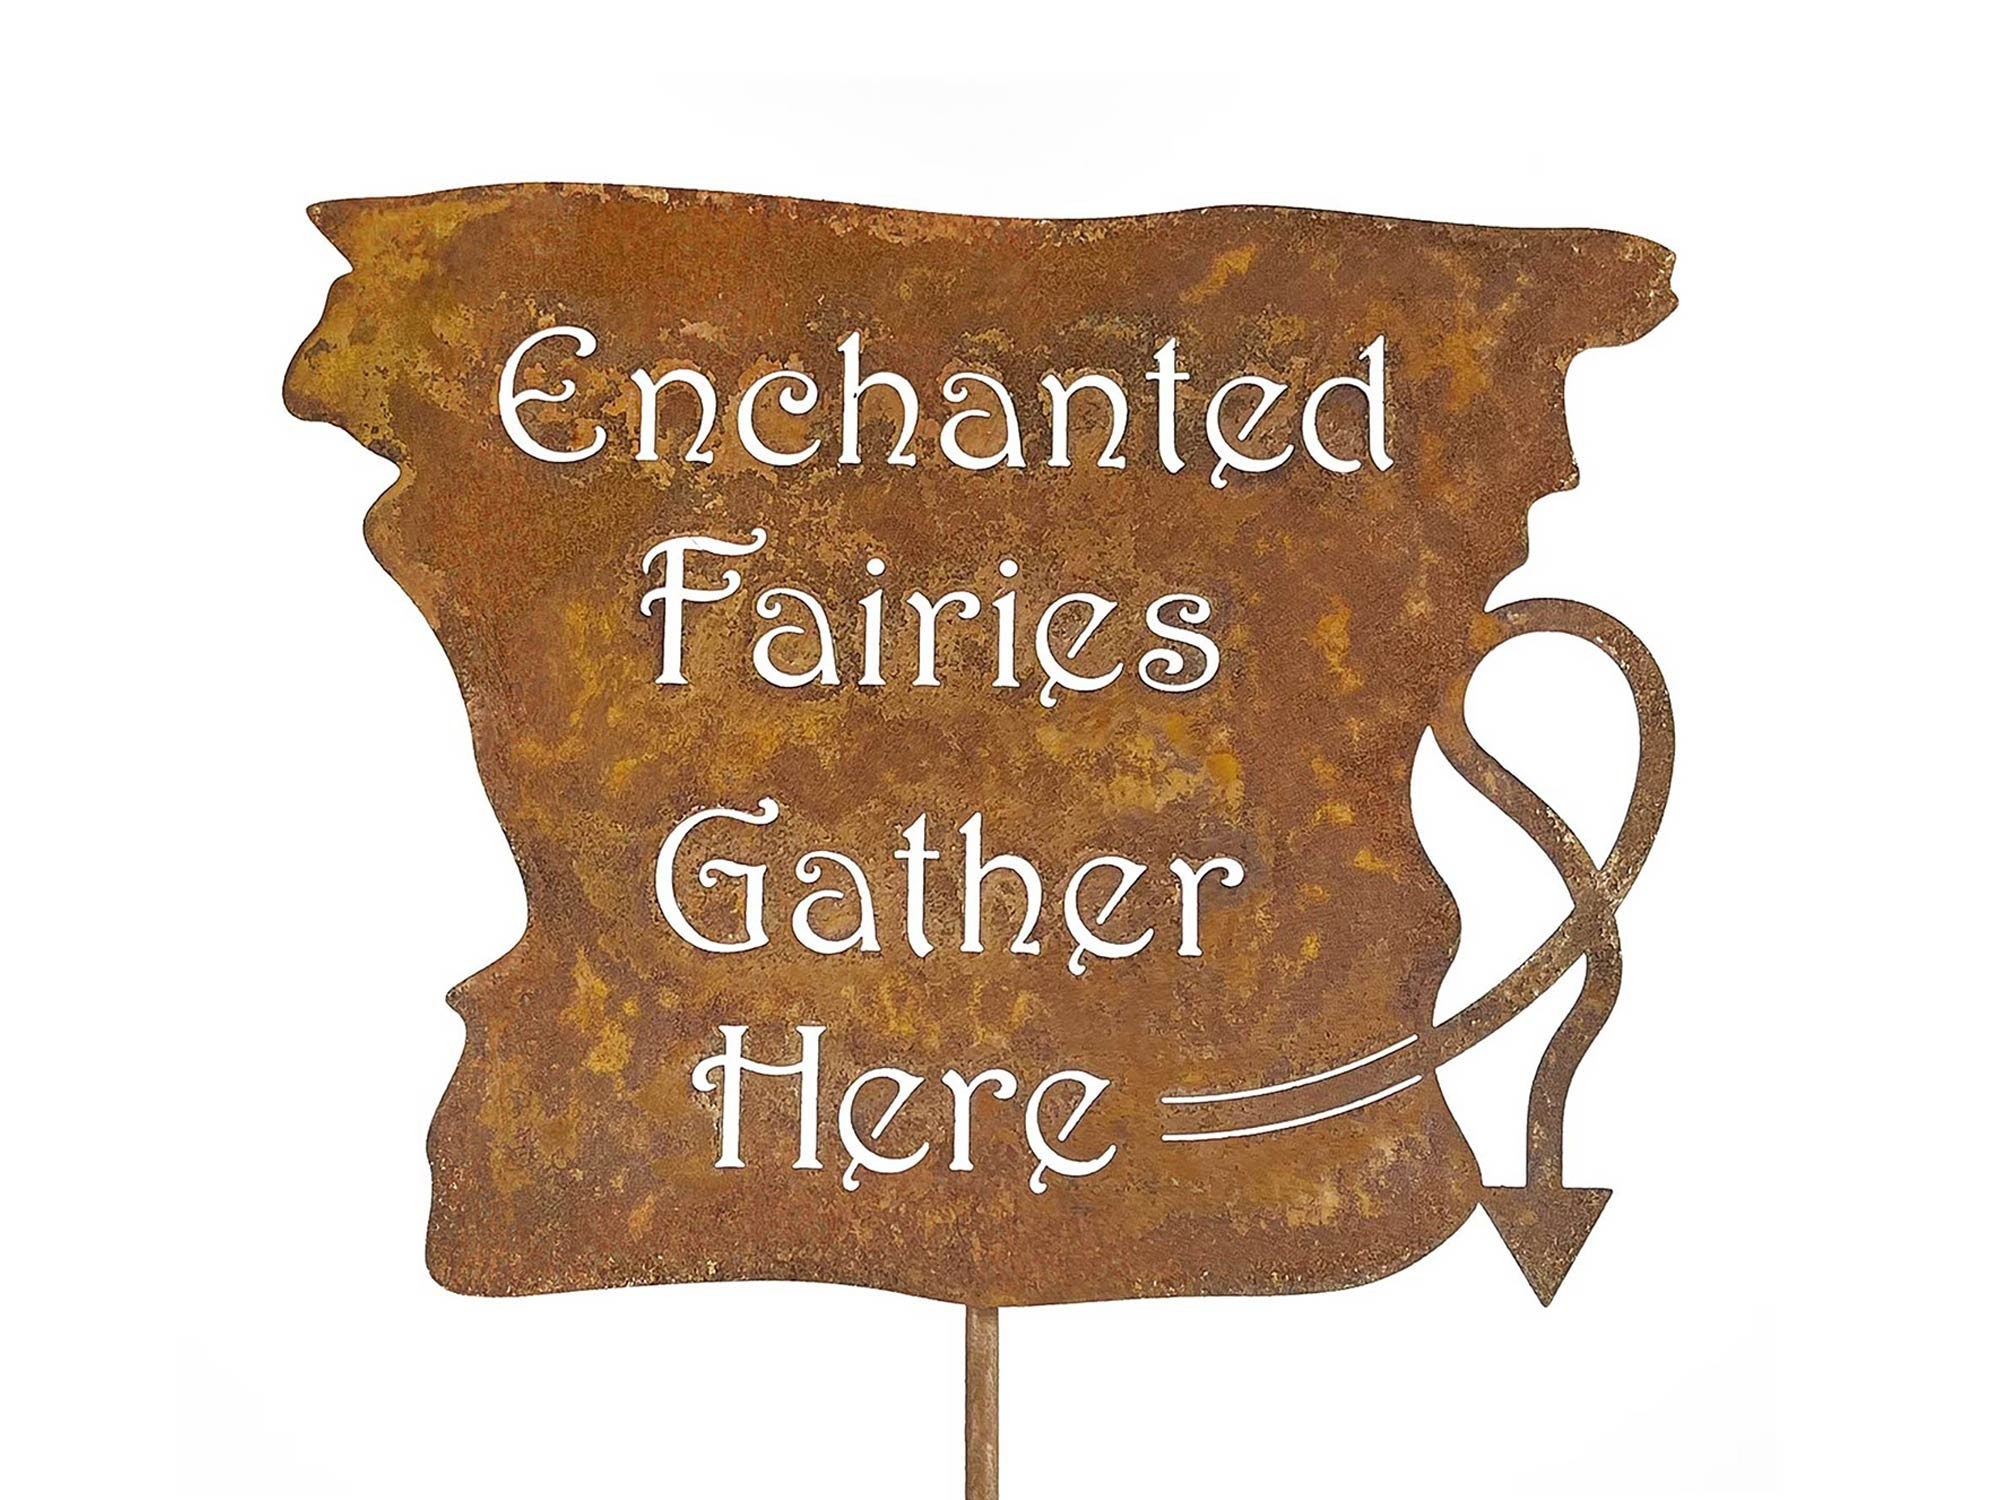 Enchanted Fairies Gather Here Yard Garden Stick Sign - Free Shipping in US